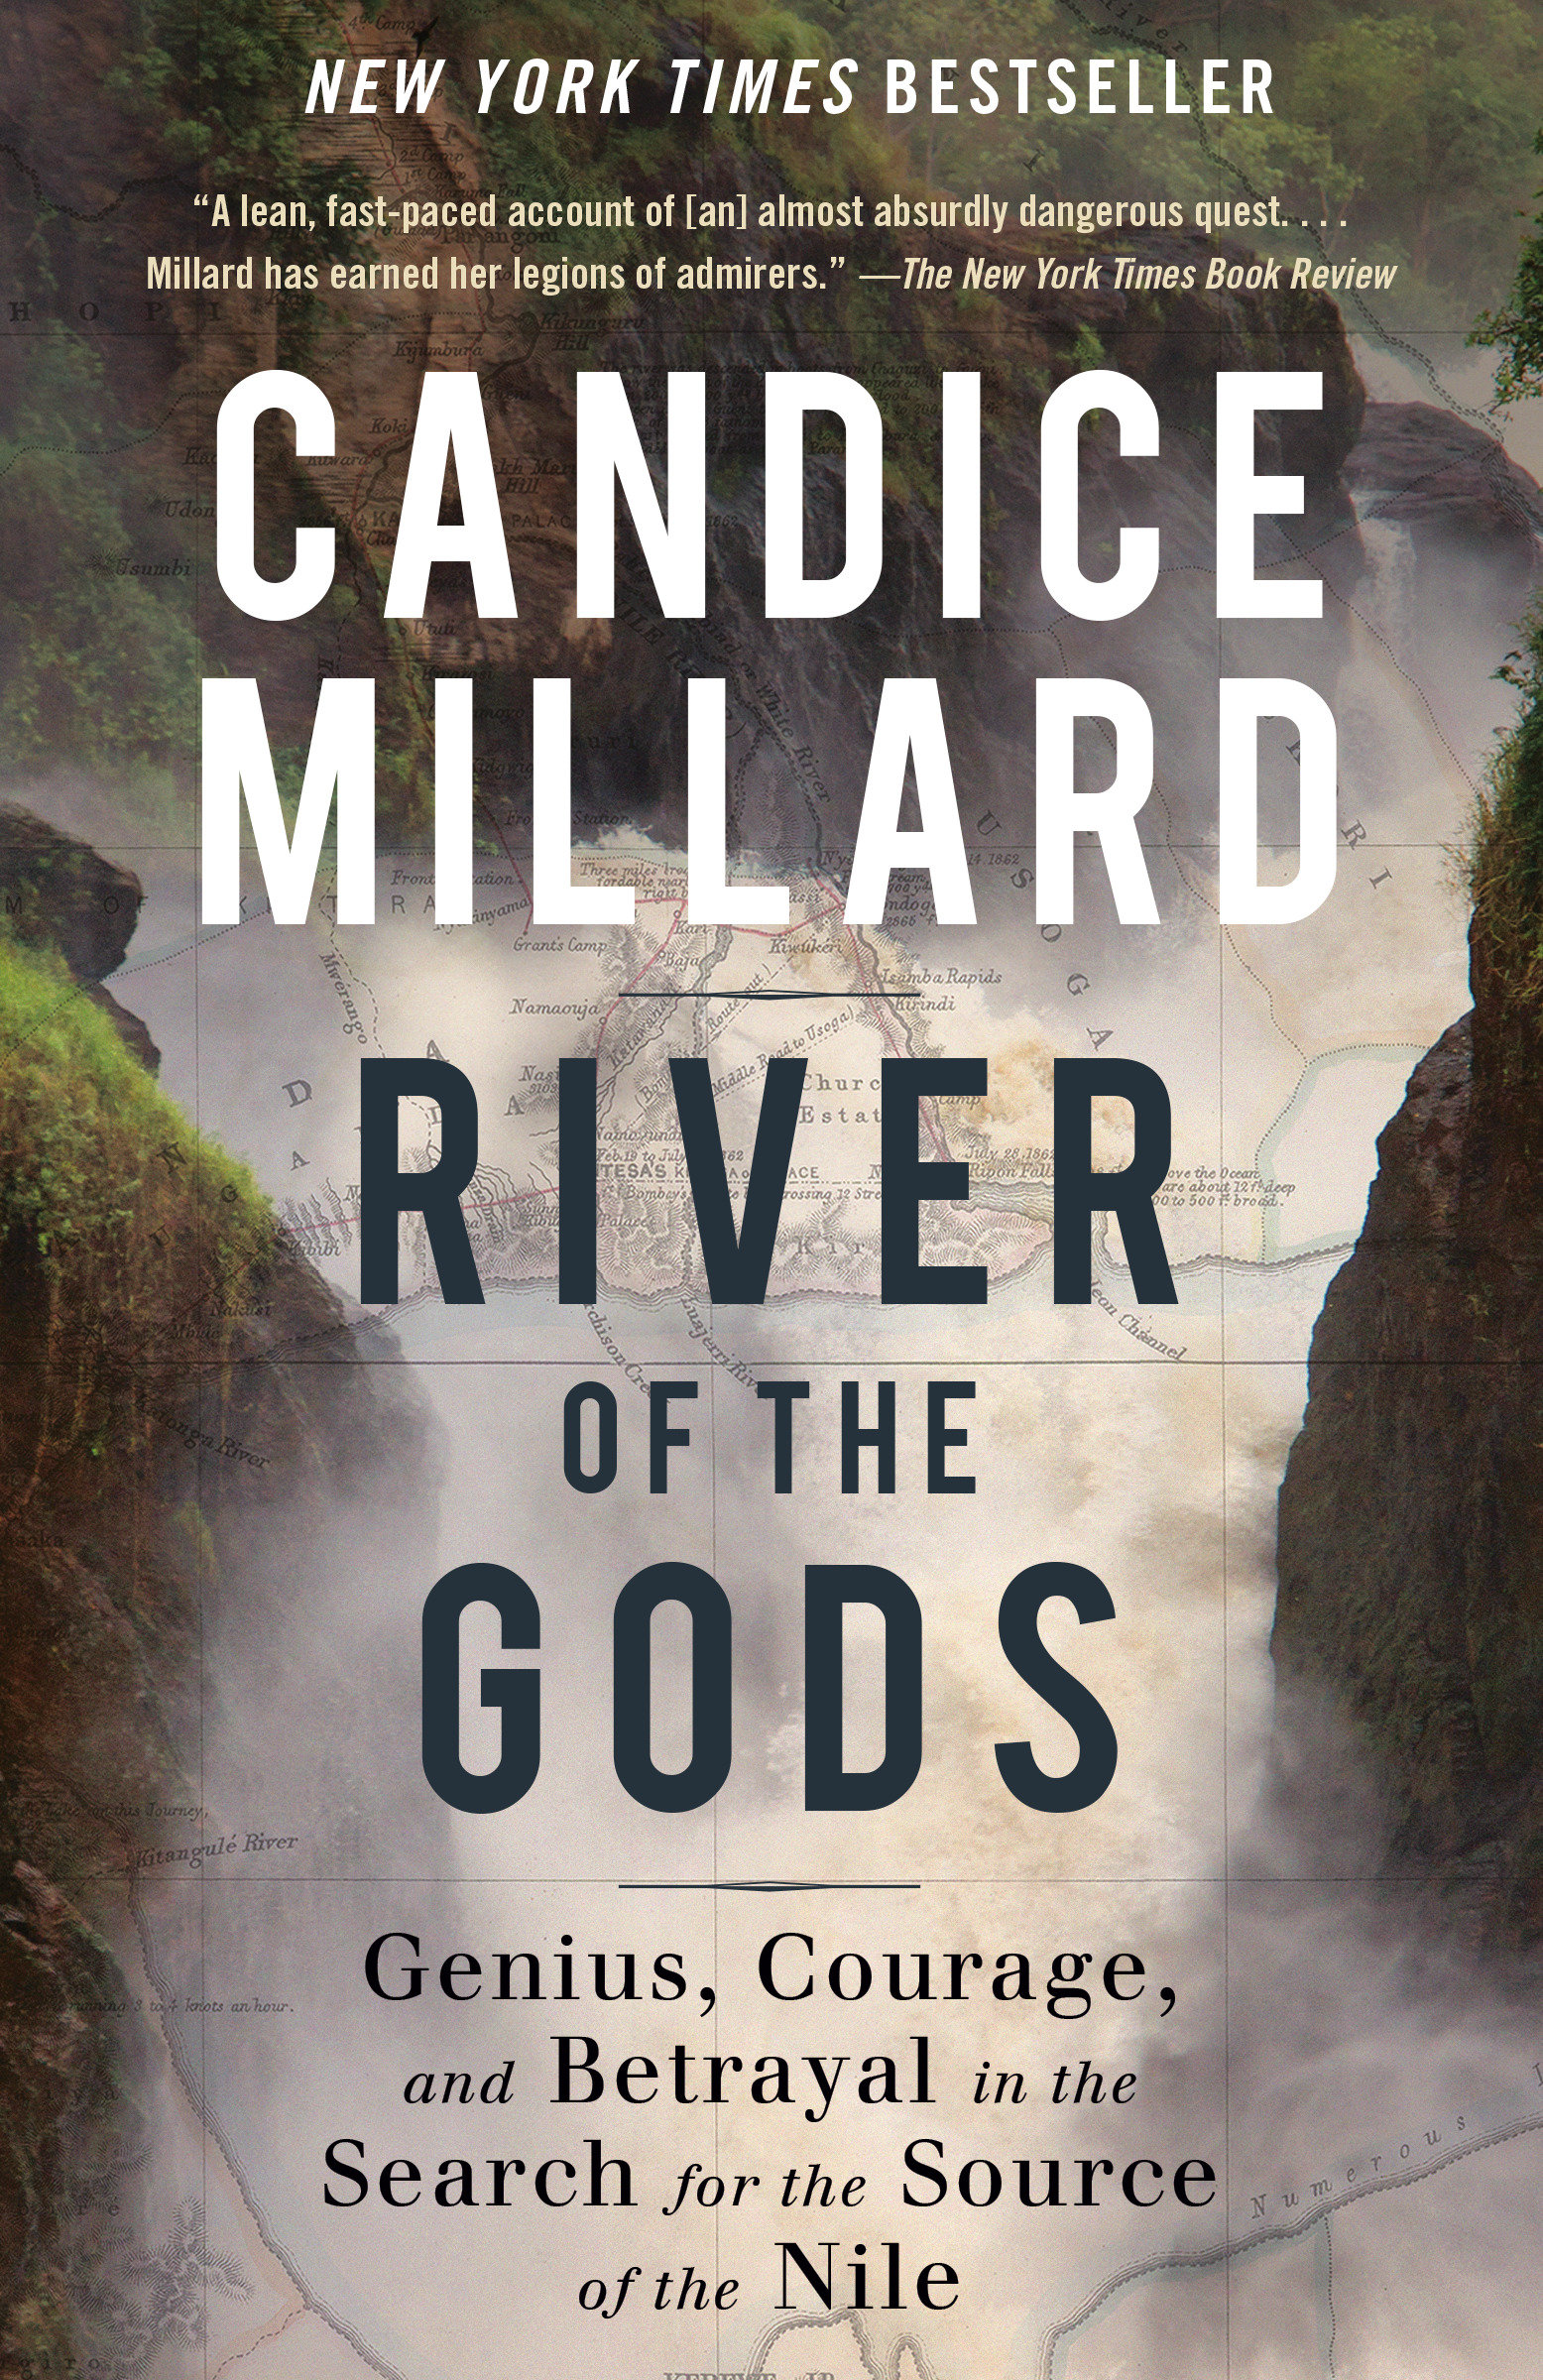 River of the Gods Genius, Courage, and Betrayal in the Search for the Source of the Nile cover image